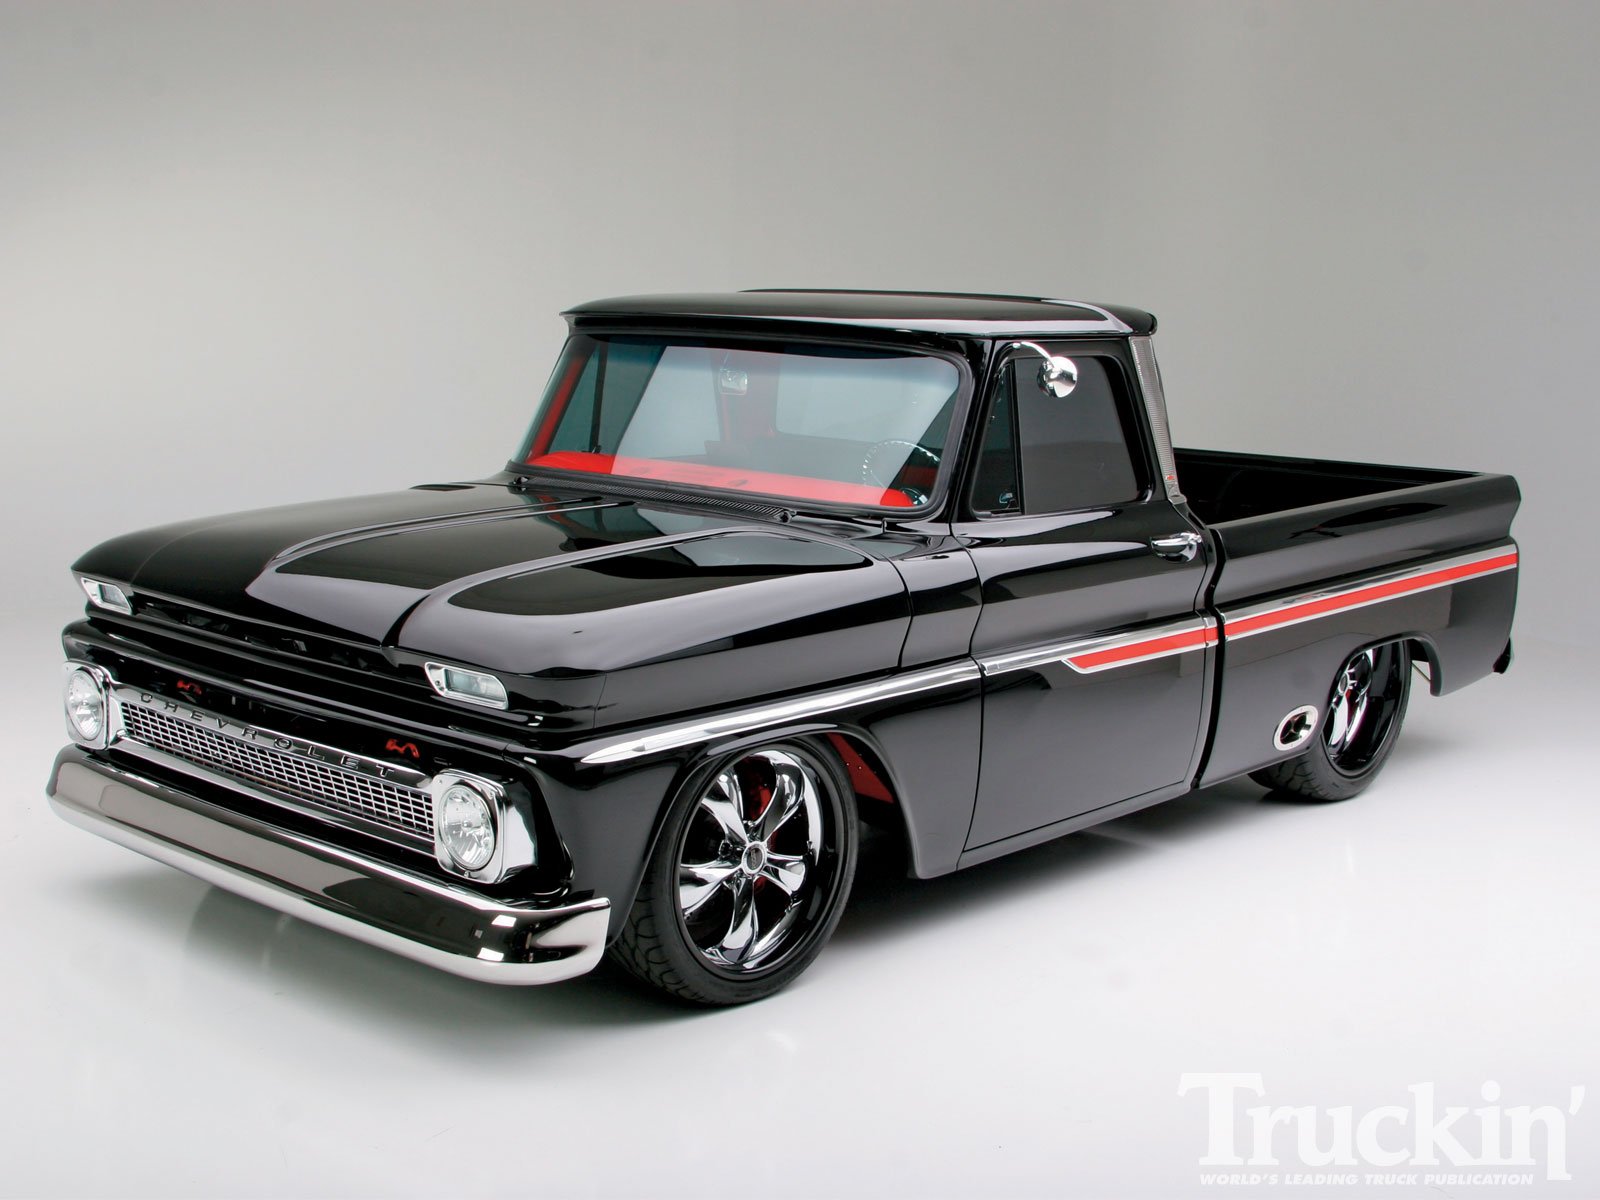 Free download Chevy Truck Wallpapers 5044 Hd Wallpapers in Cars